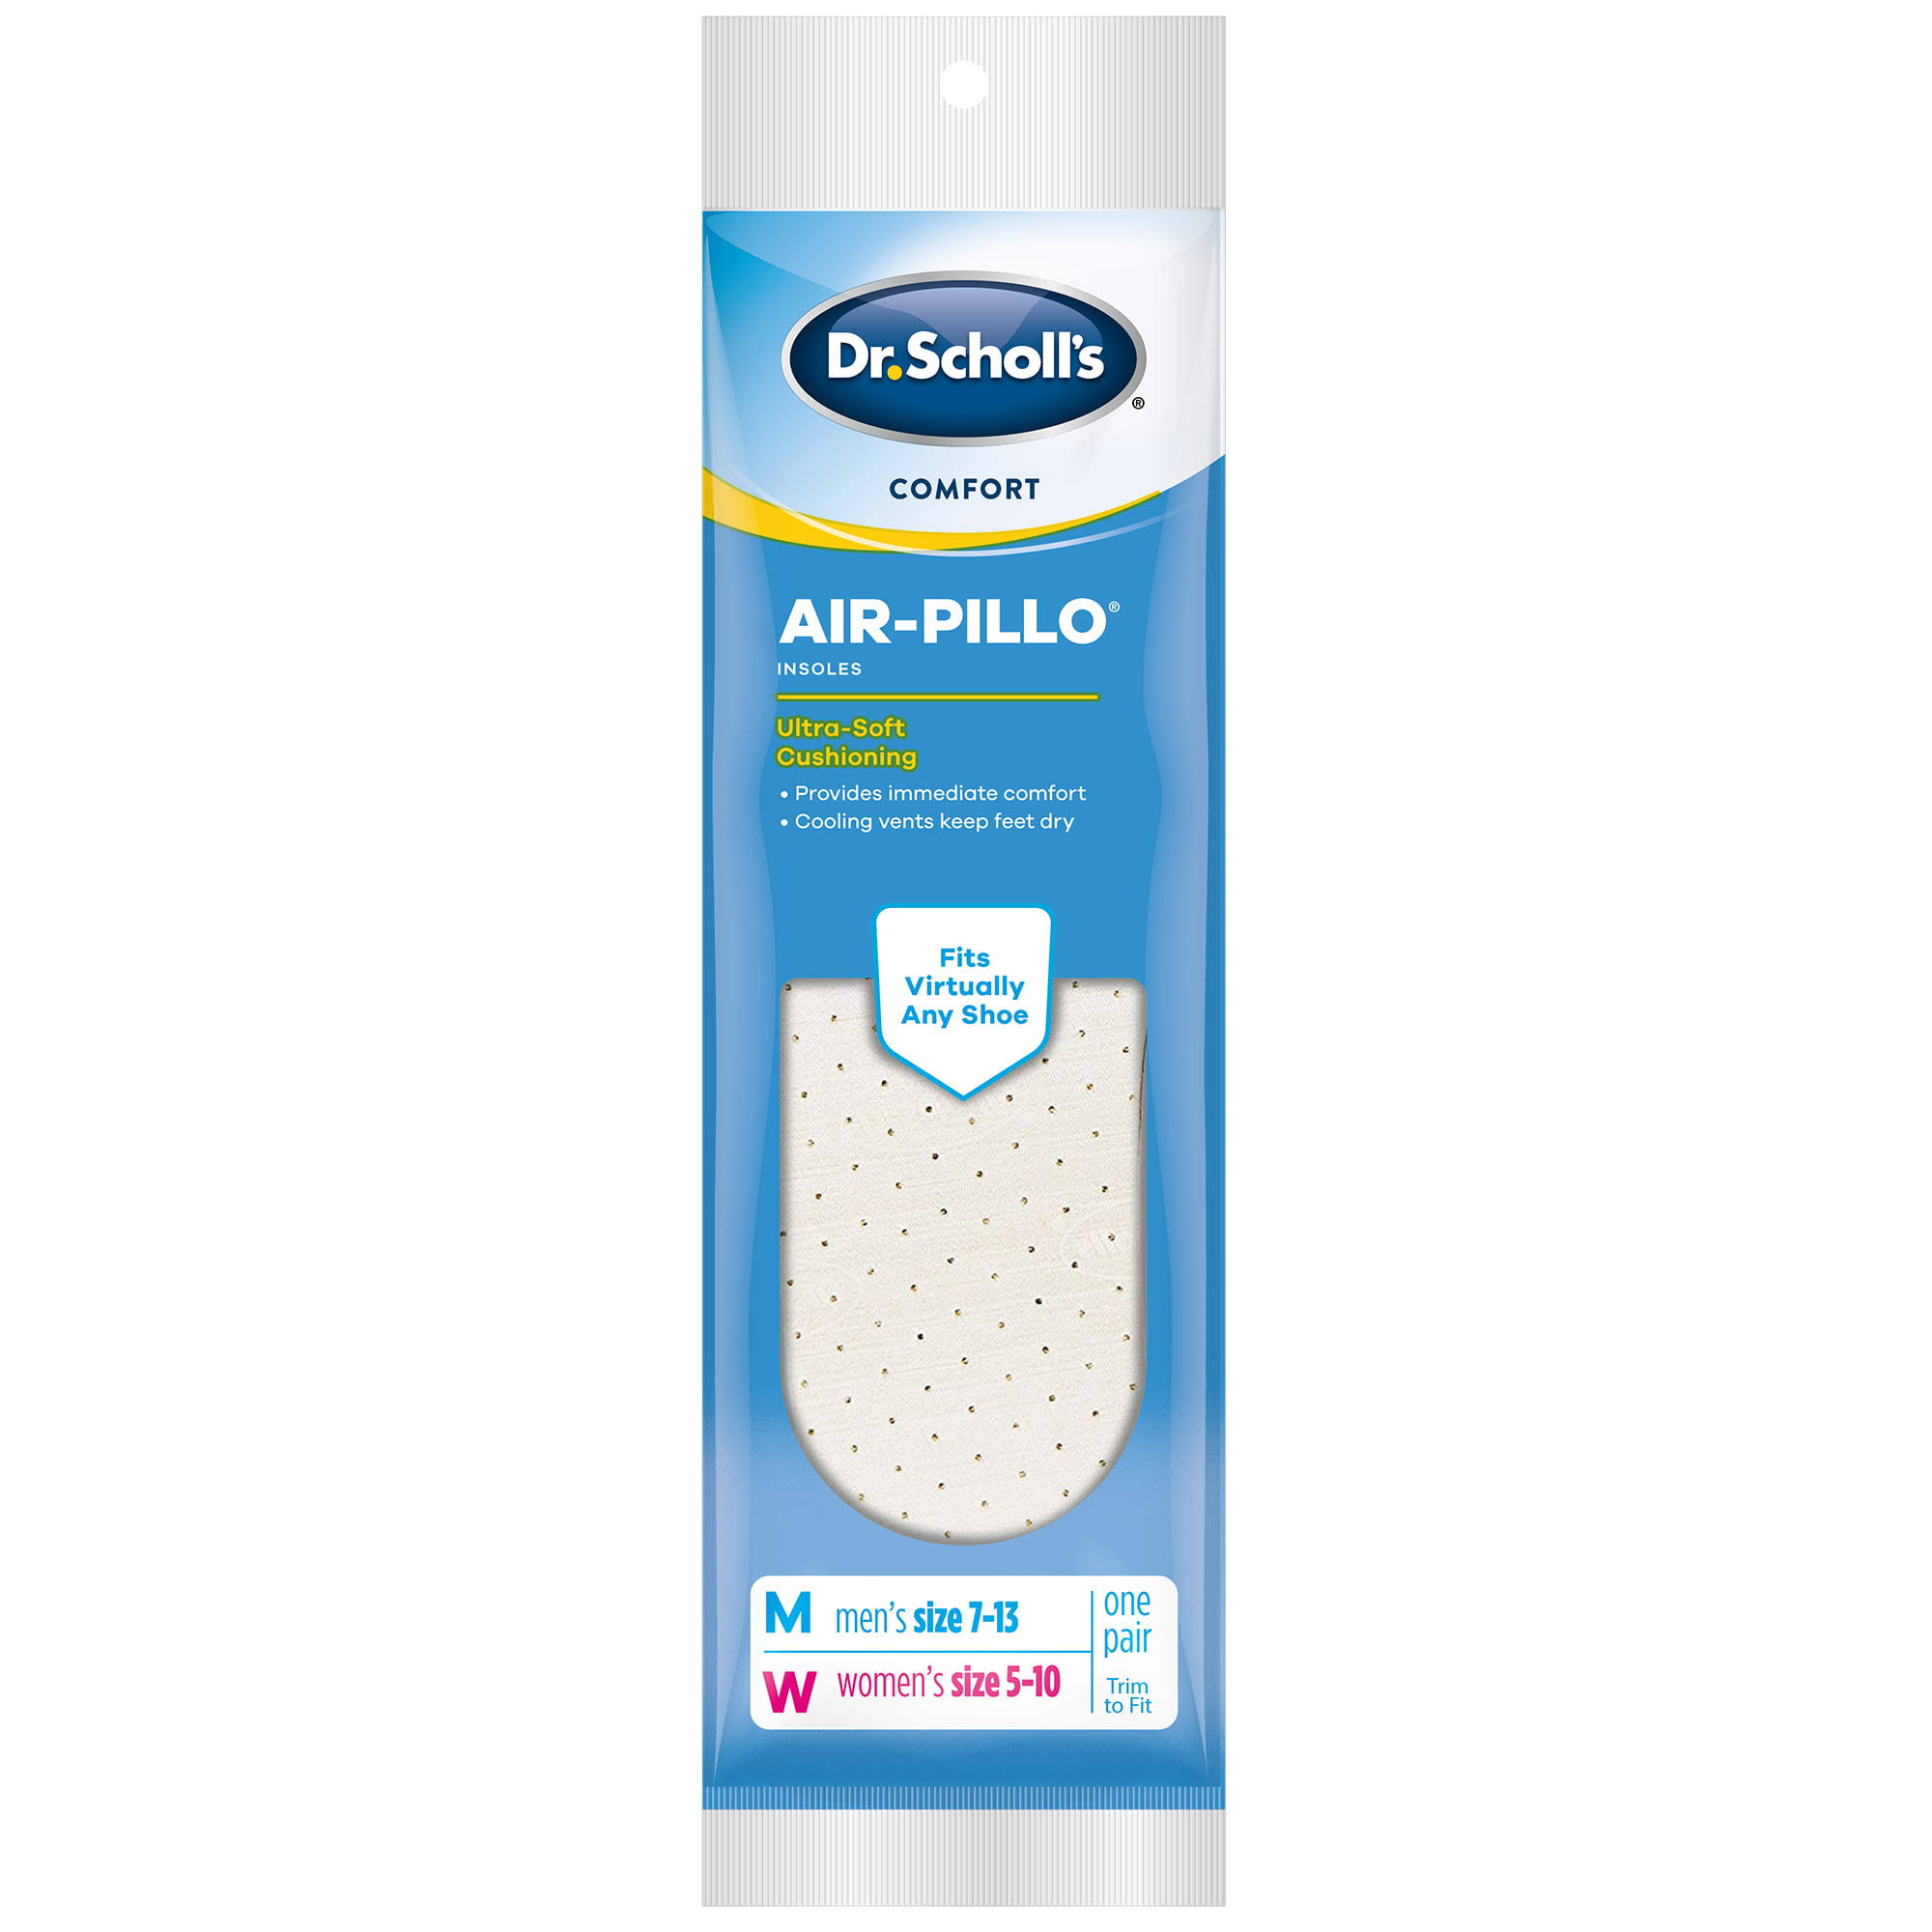 Dr. Scholl's Air-Pillo Insoles Ultra-soft Cushioning and Lasting Comfort With Two Layers of Foam That Fit in Any Shoe - One Pair